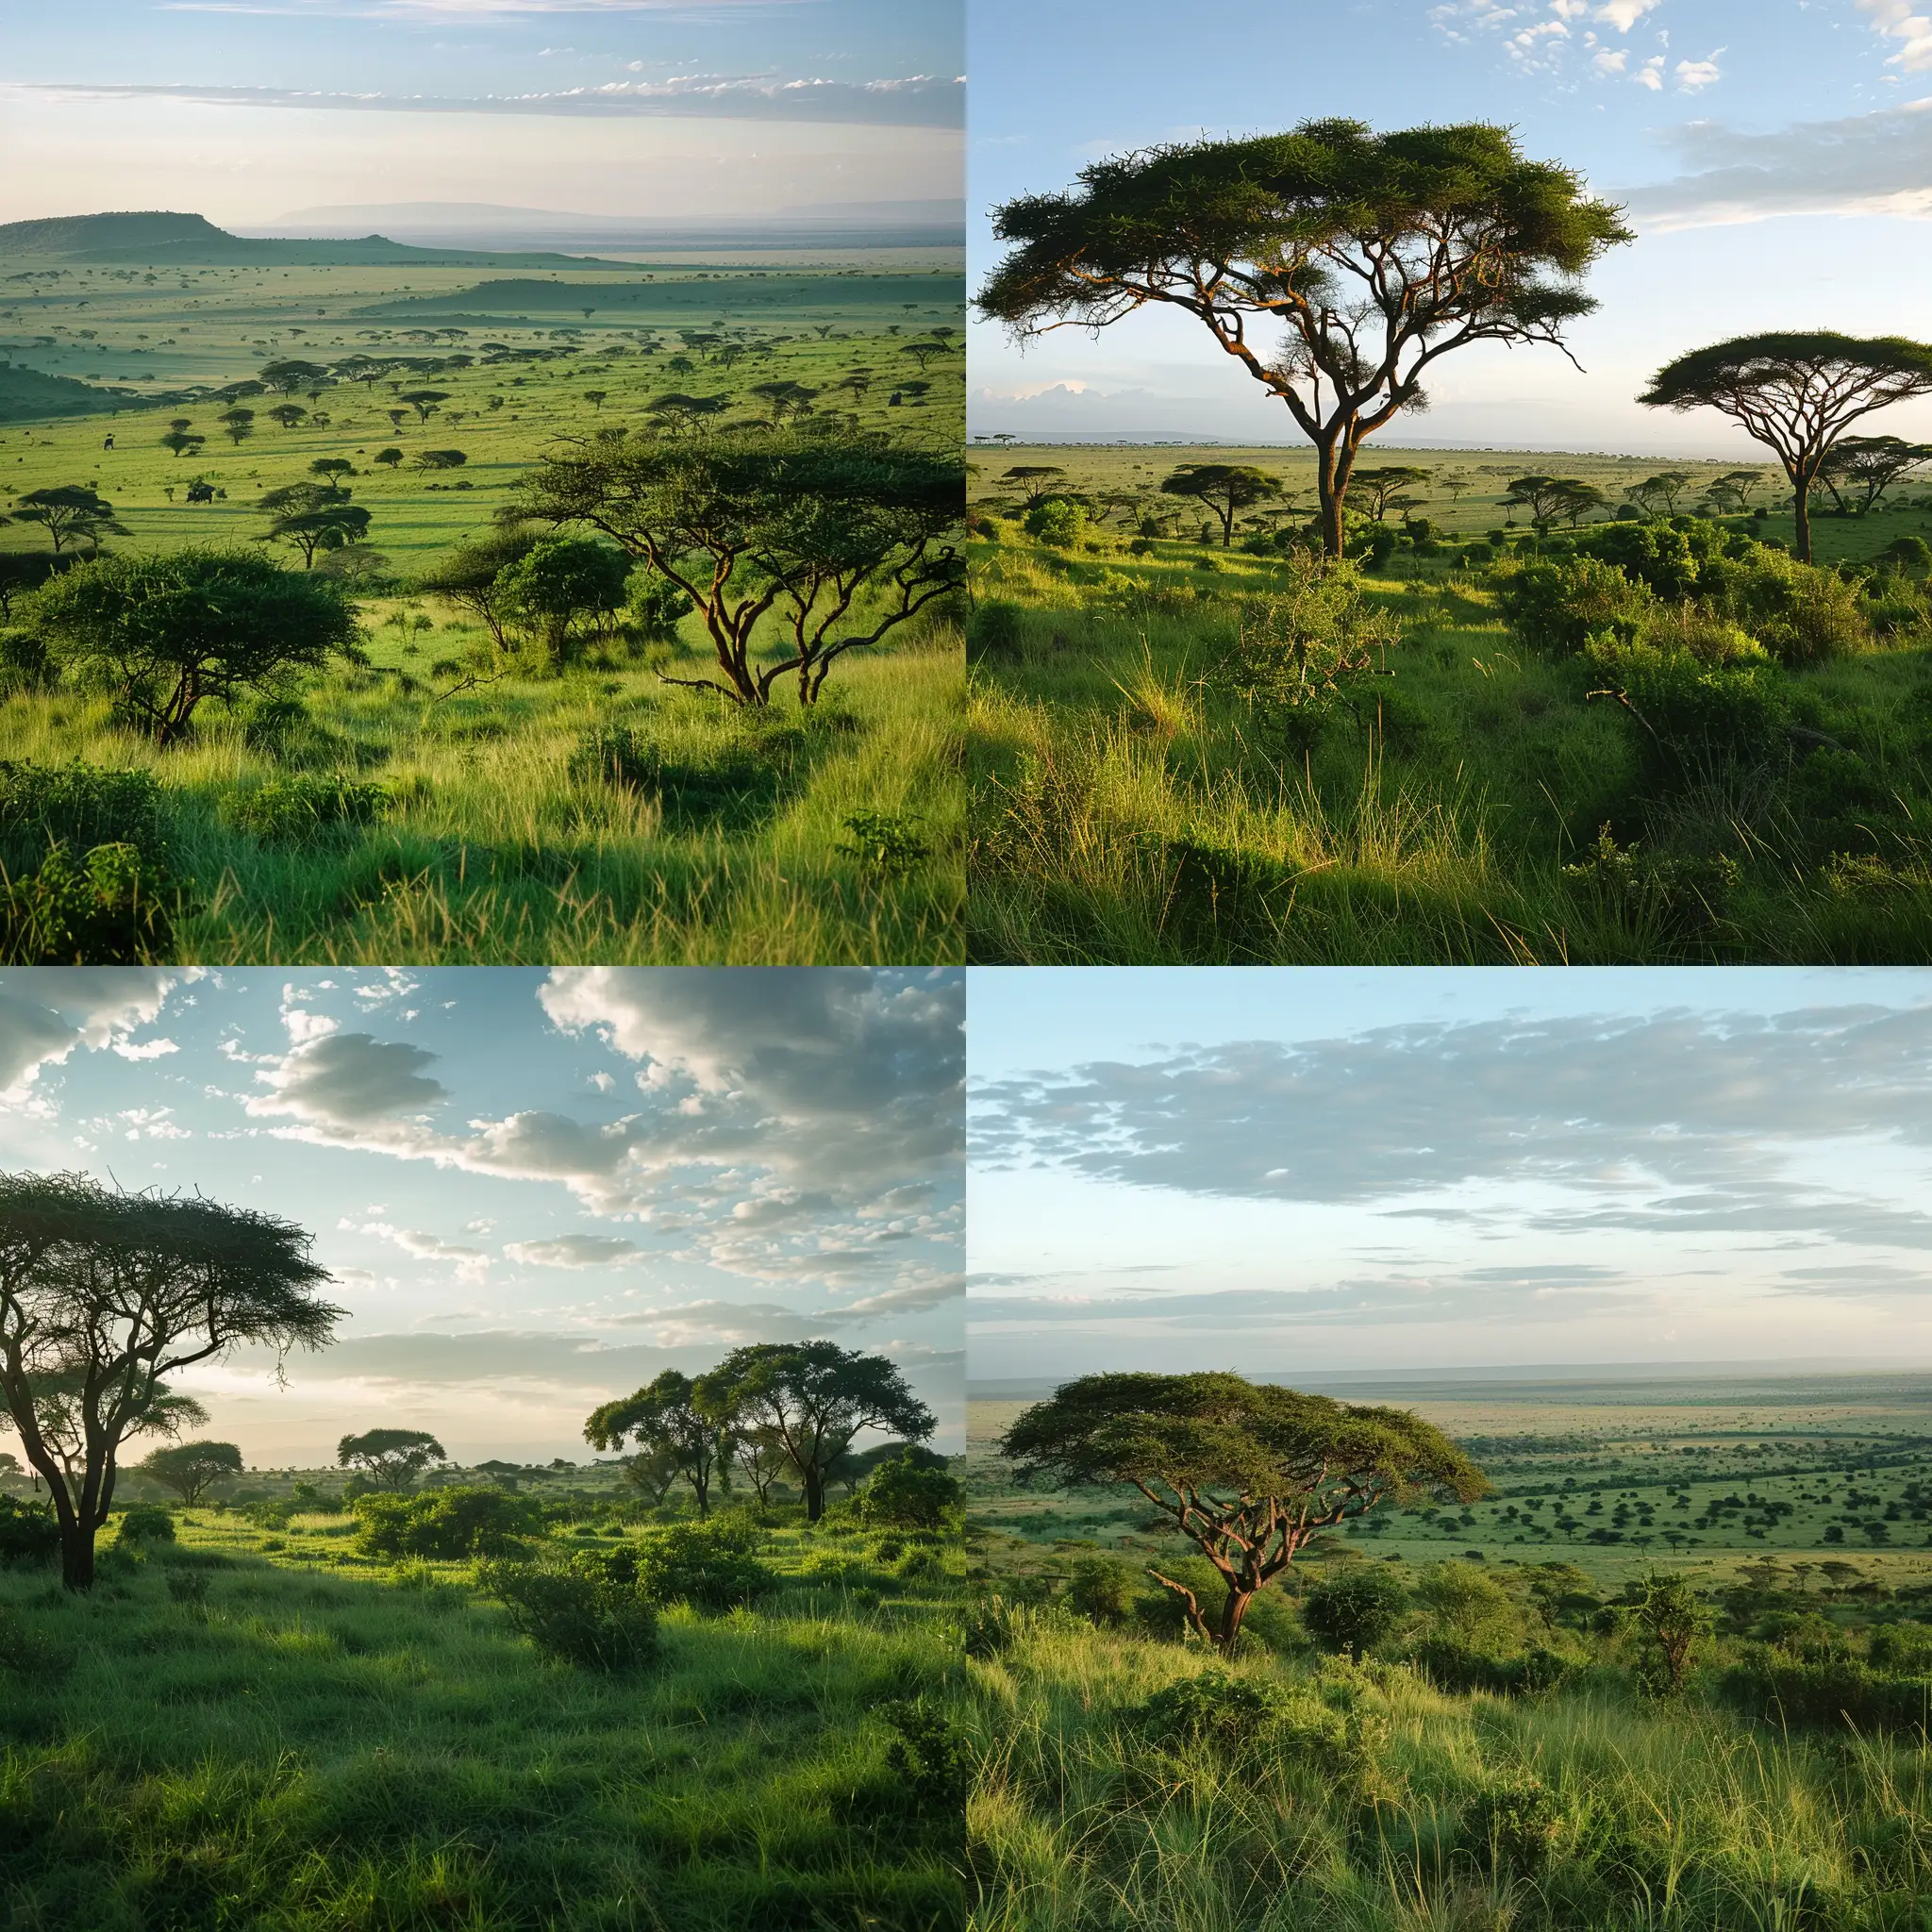 lush greenery and the vibrant colors of the savanna, setting in Kenya, morning